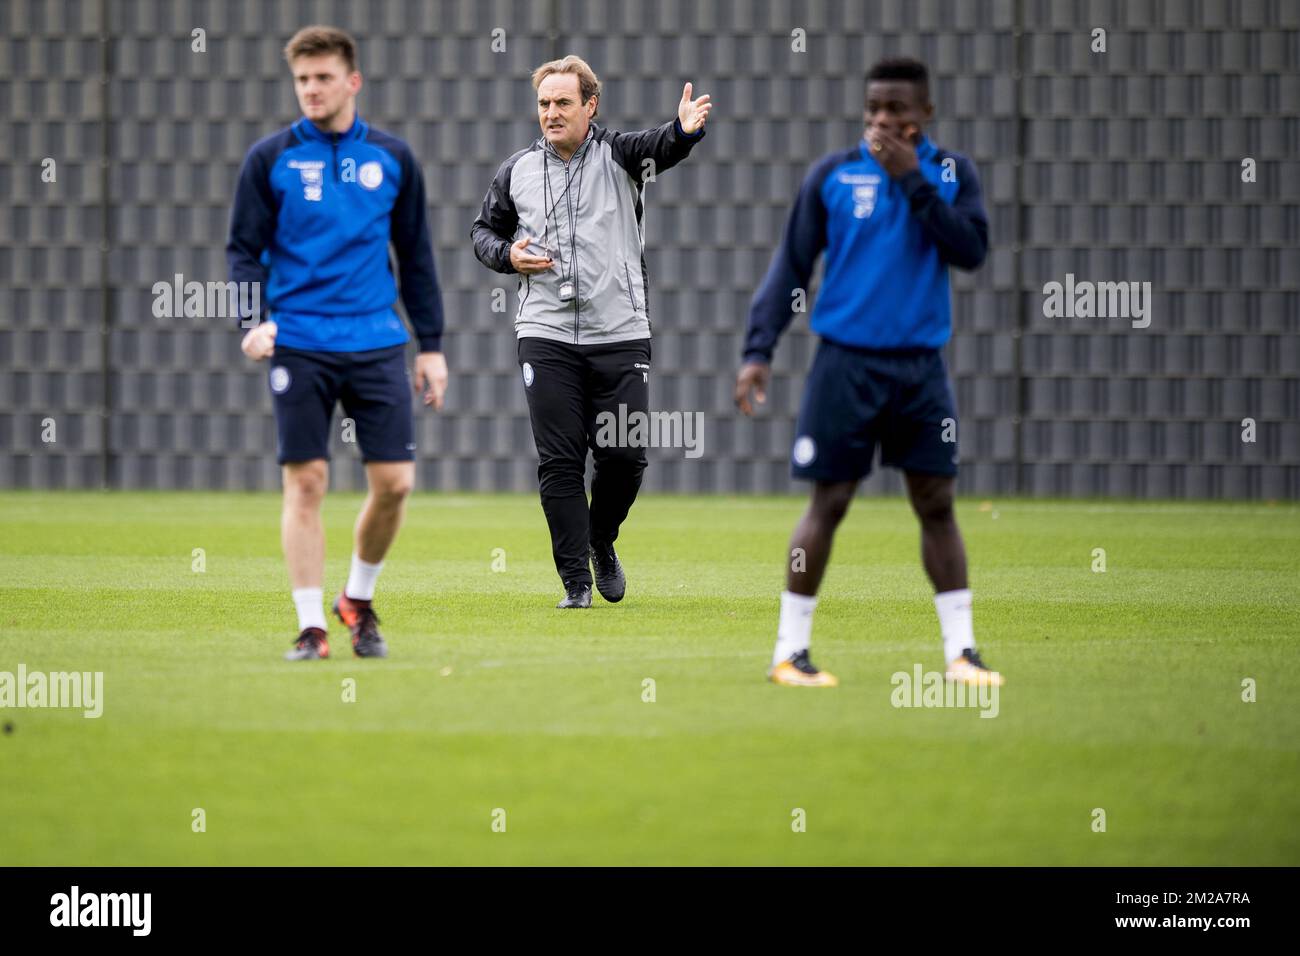 Gent's Thomas Foket, Gent's head coach Yves Vanderhaeghe and Gent's Moses Simon pictured during a training session of Belgian first division soccer team KAA Gent, Wednesday 11 October 2017 in Gent. It's their first session with new head coach Vanderhaeghe. BELGA PHOTO JASPER JACOBS Stock Photo